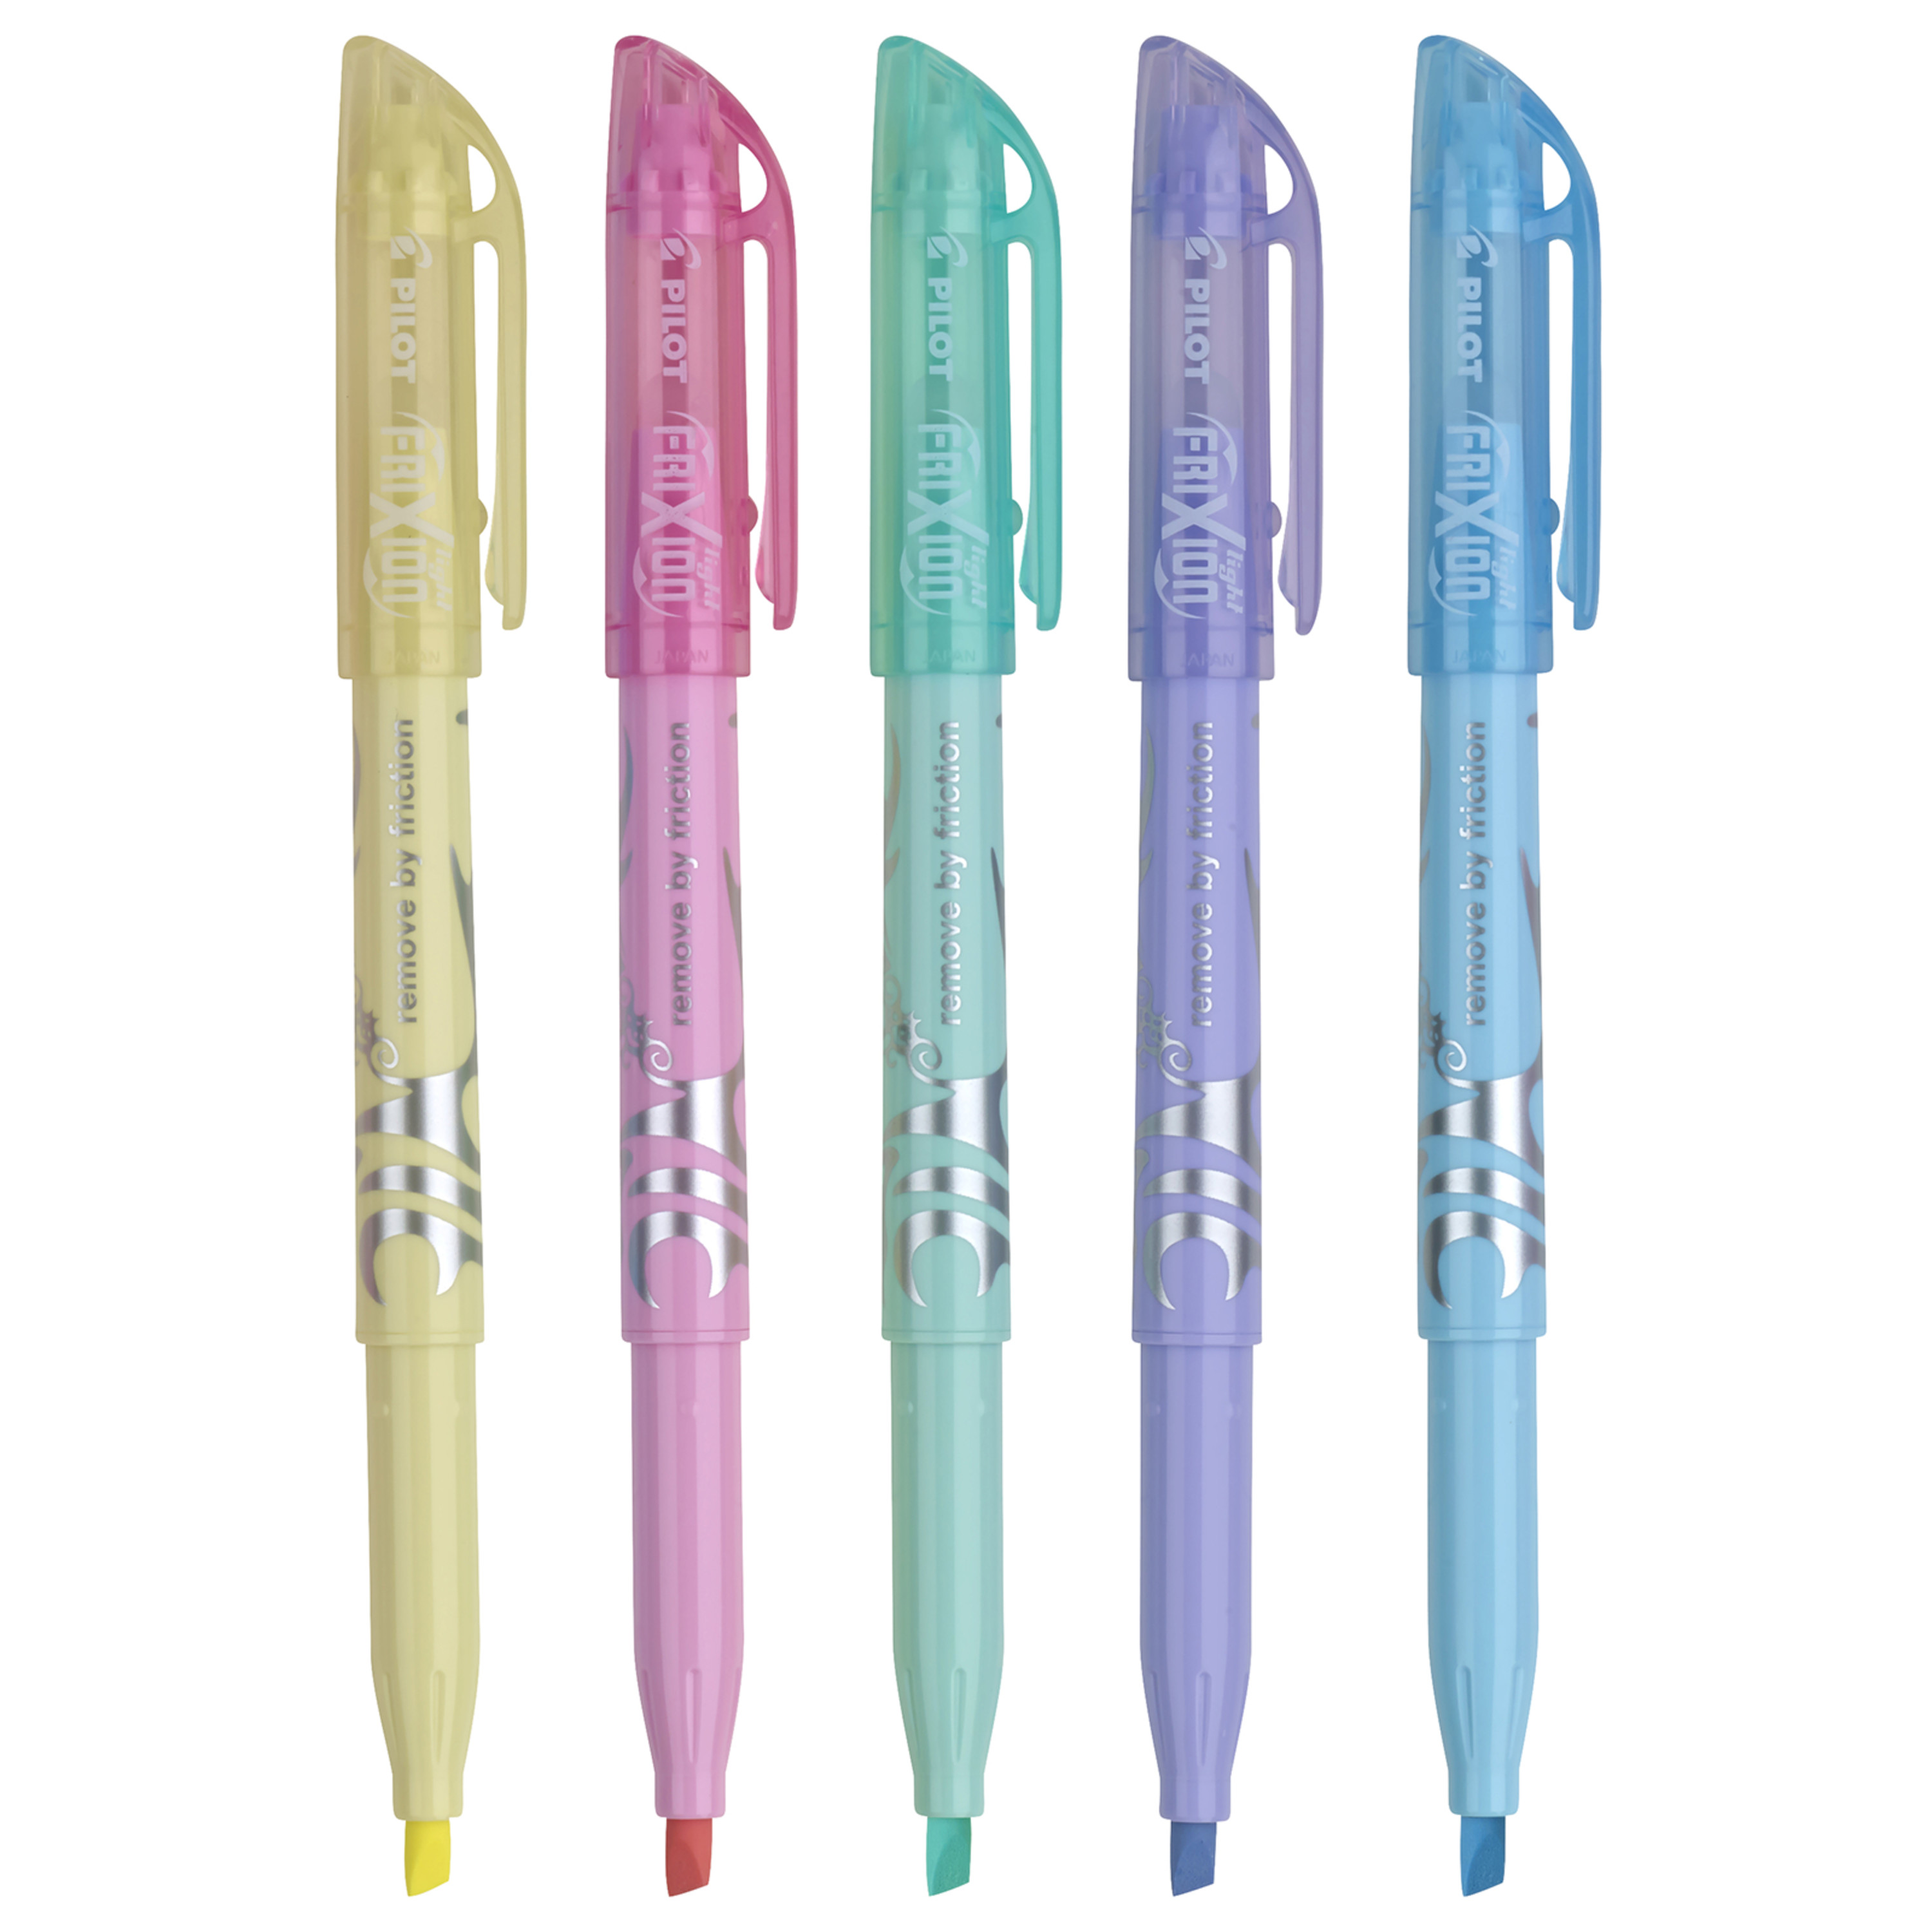 Pilot FriXion Light Erasable Highlighters, 5-Colors - image 3 of 3